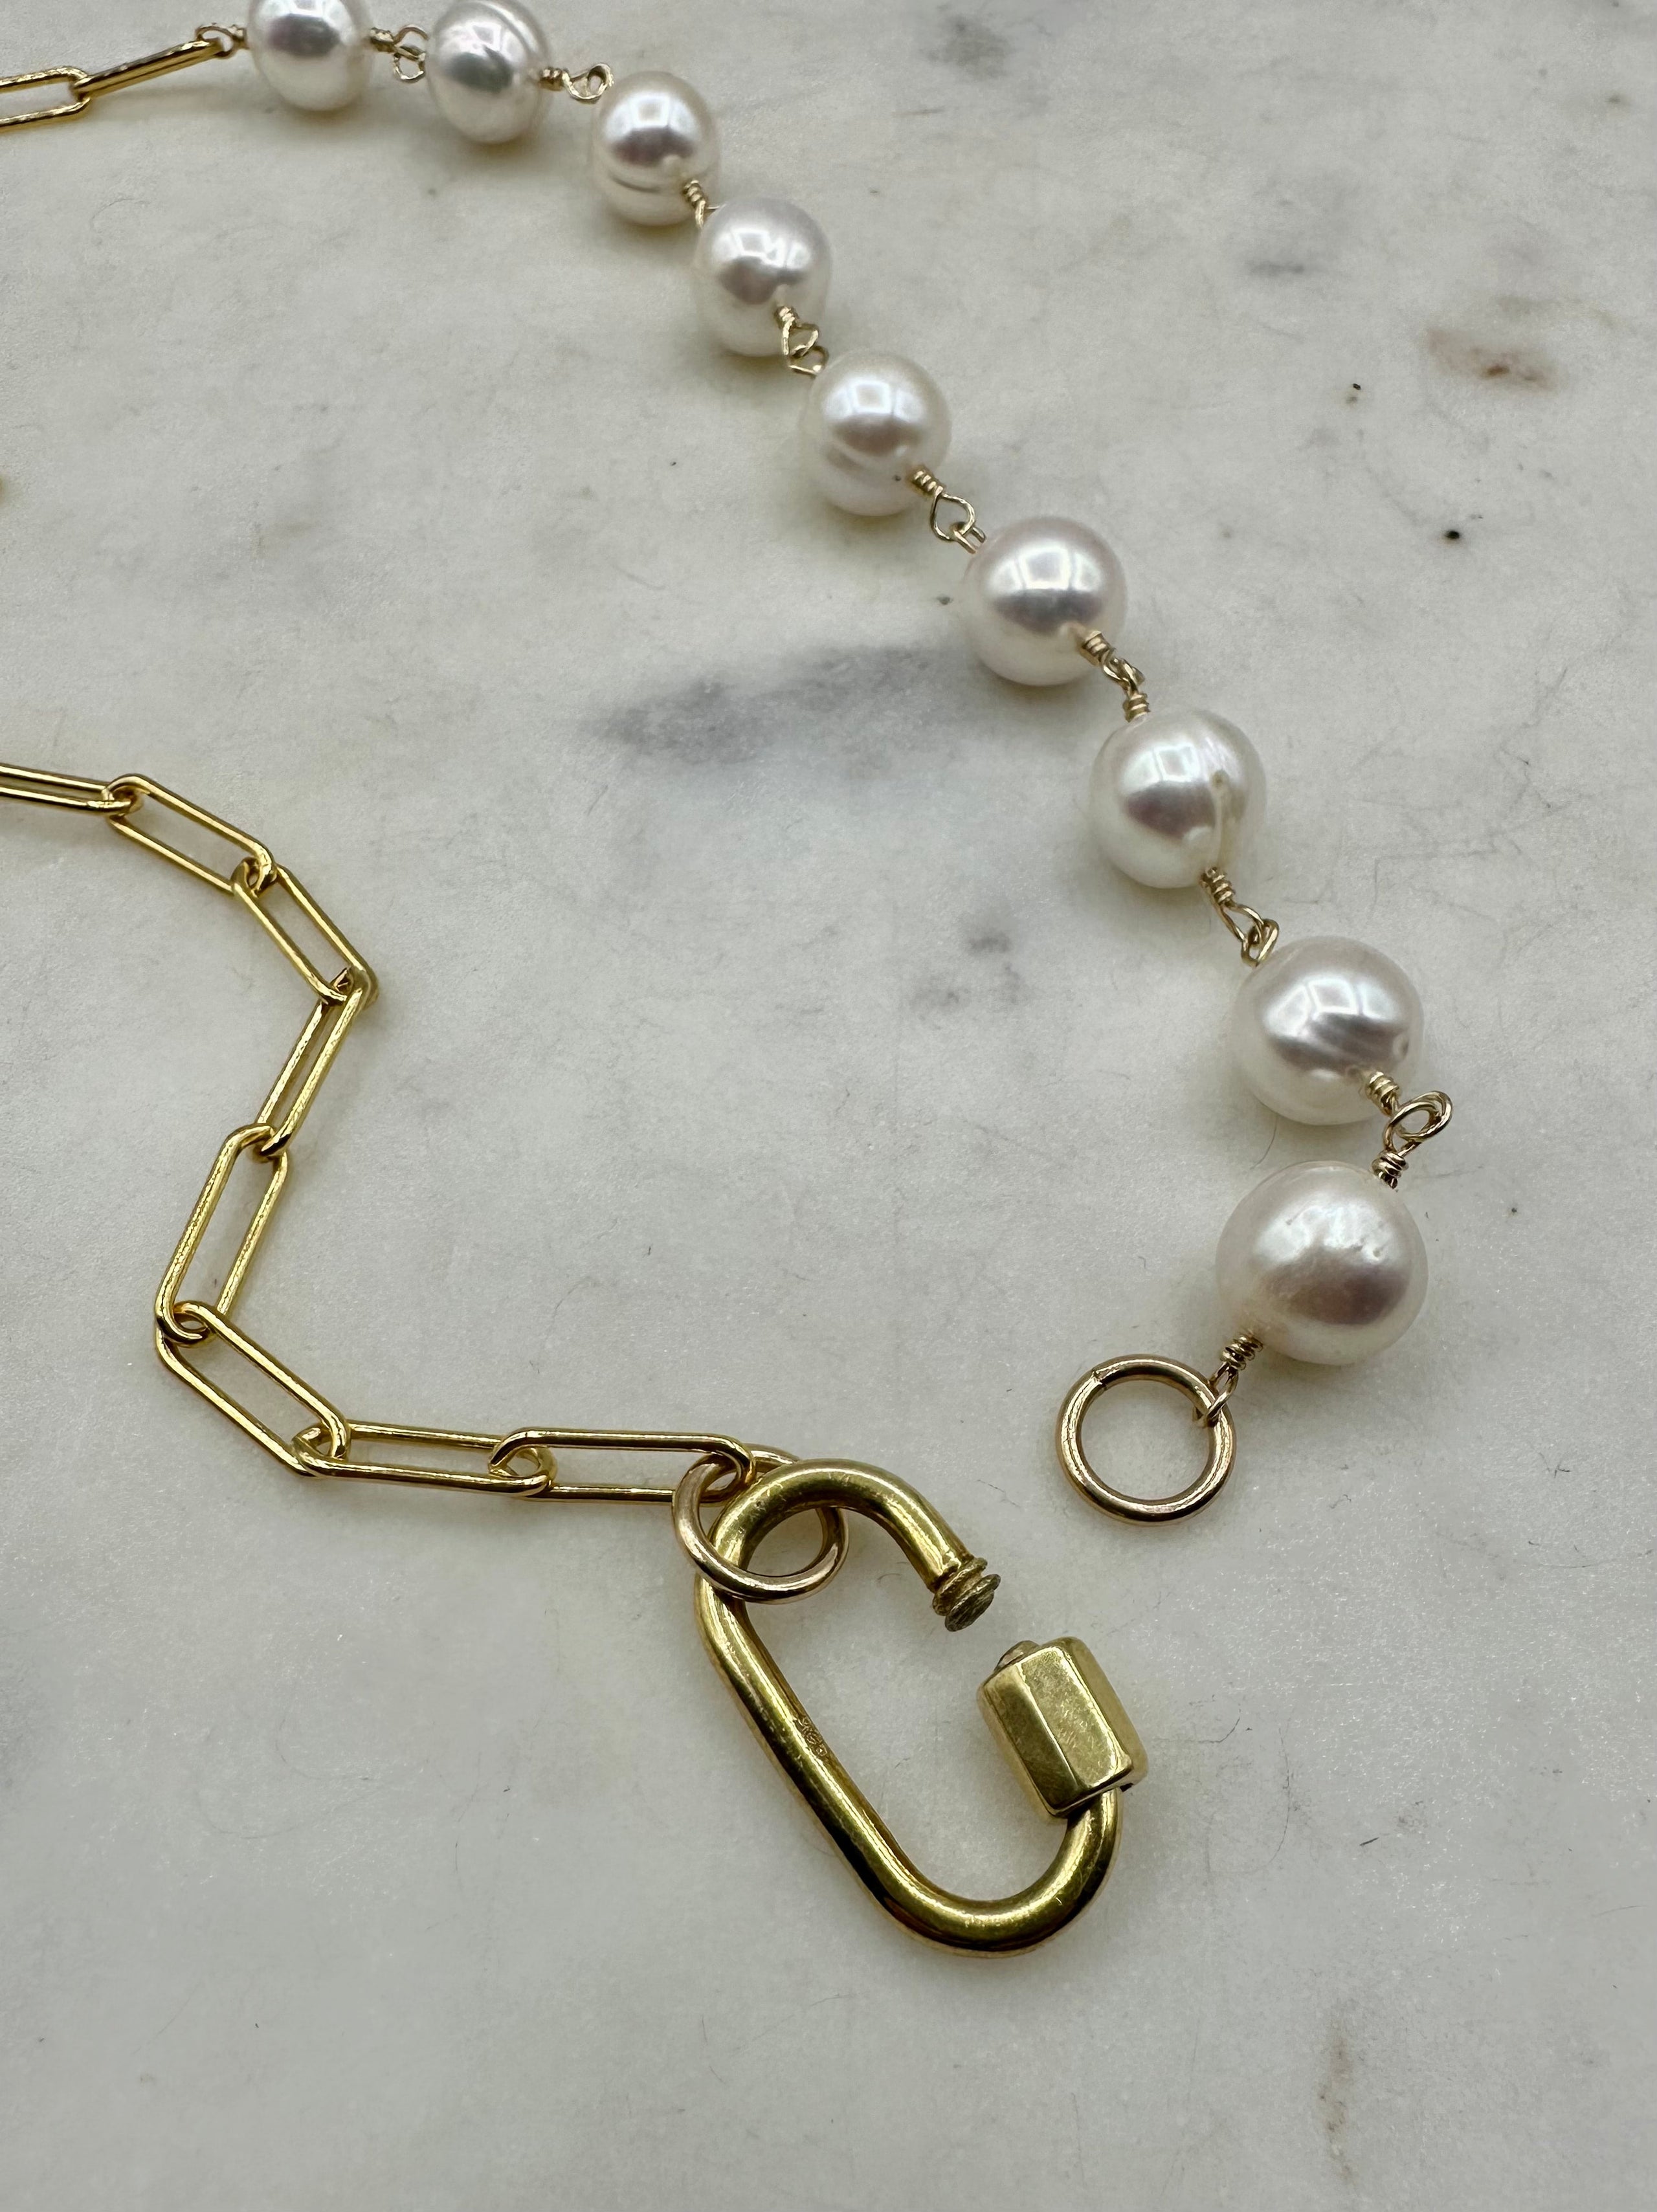 Gold Carabiner Necklace, Gold Lock Necklace, Gold Chunky Charm Necklace,  Gold Carabiner Lock Necklace, Gold Pearl Necklace 